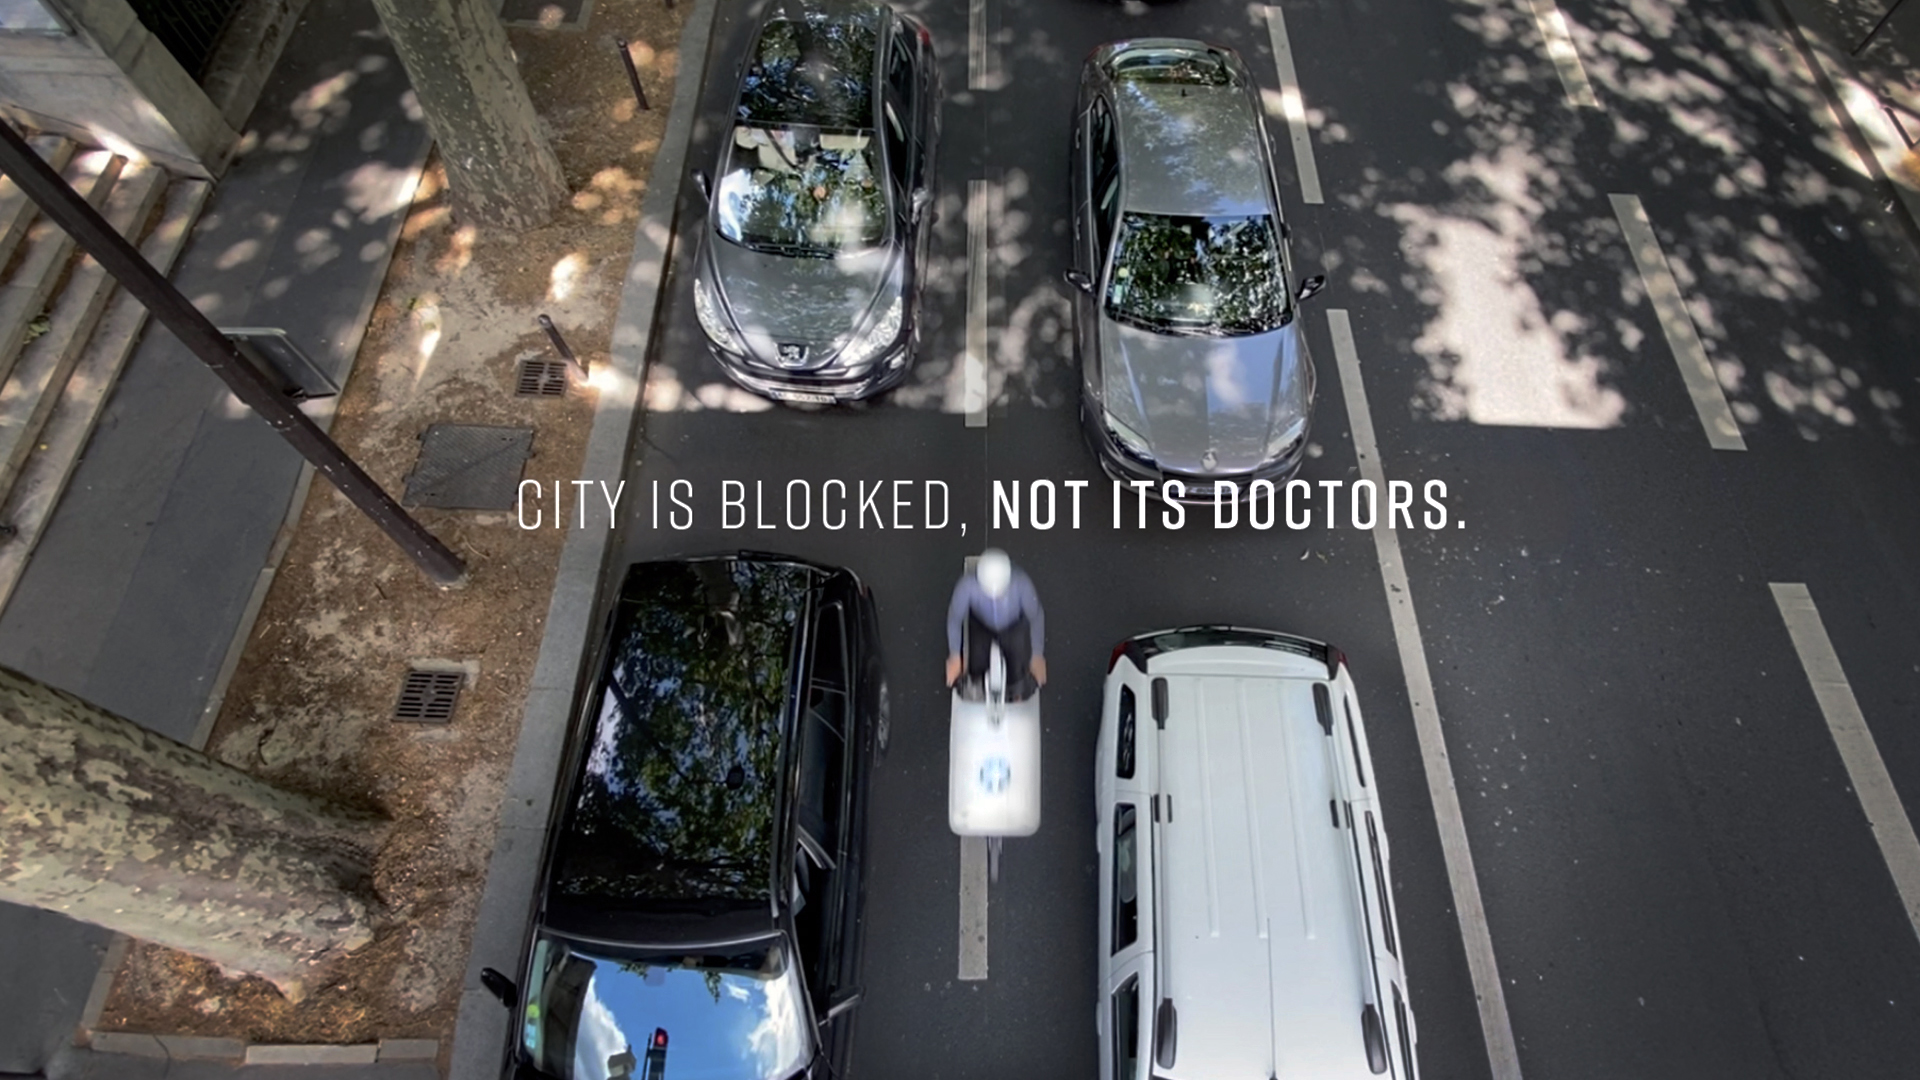 EmergencyBikes – City is blocked, not its doctors